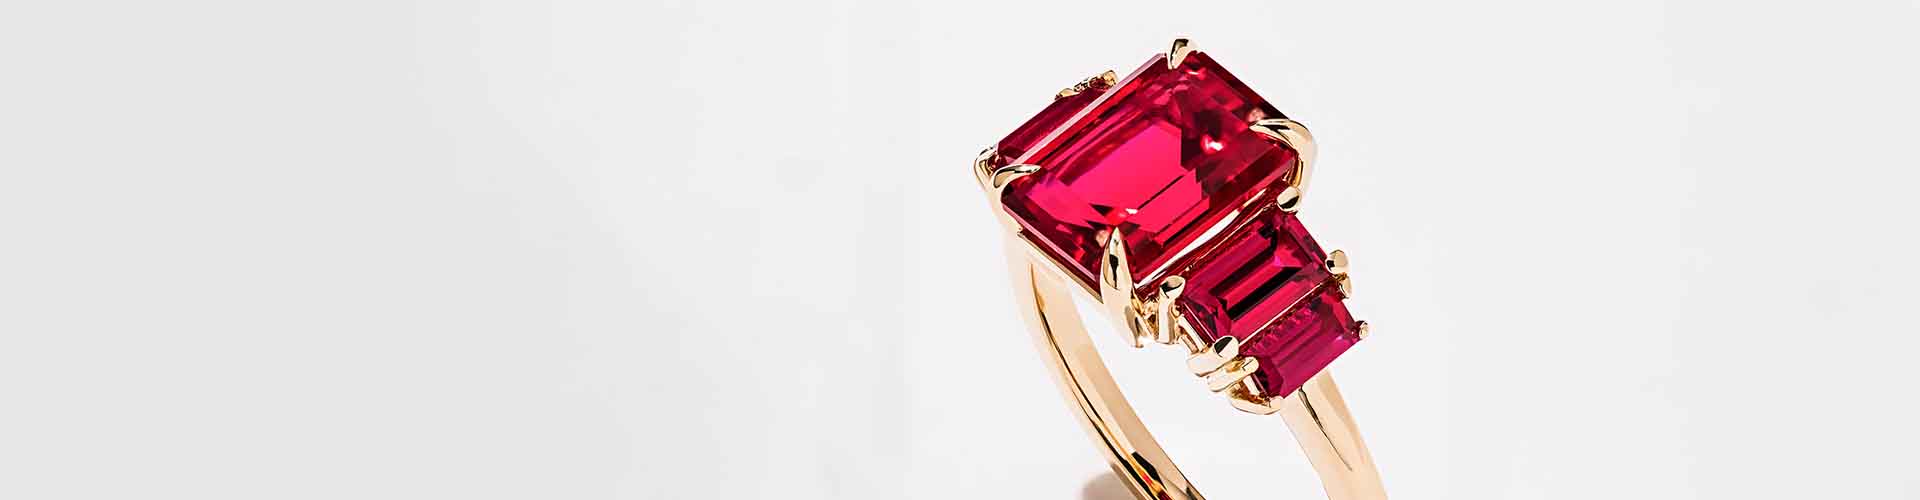 Image of a stunning MiaDonna custom five-stone ruby ring featuring a claw-pronged, large emerald-cut ruby center stone flanked by progressively smaller emerald-cut rubies with round prongs, and a rose gold band.